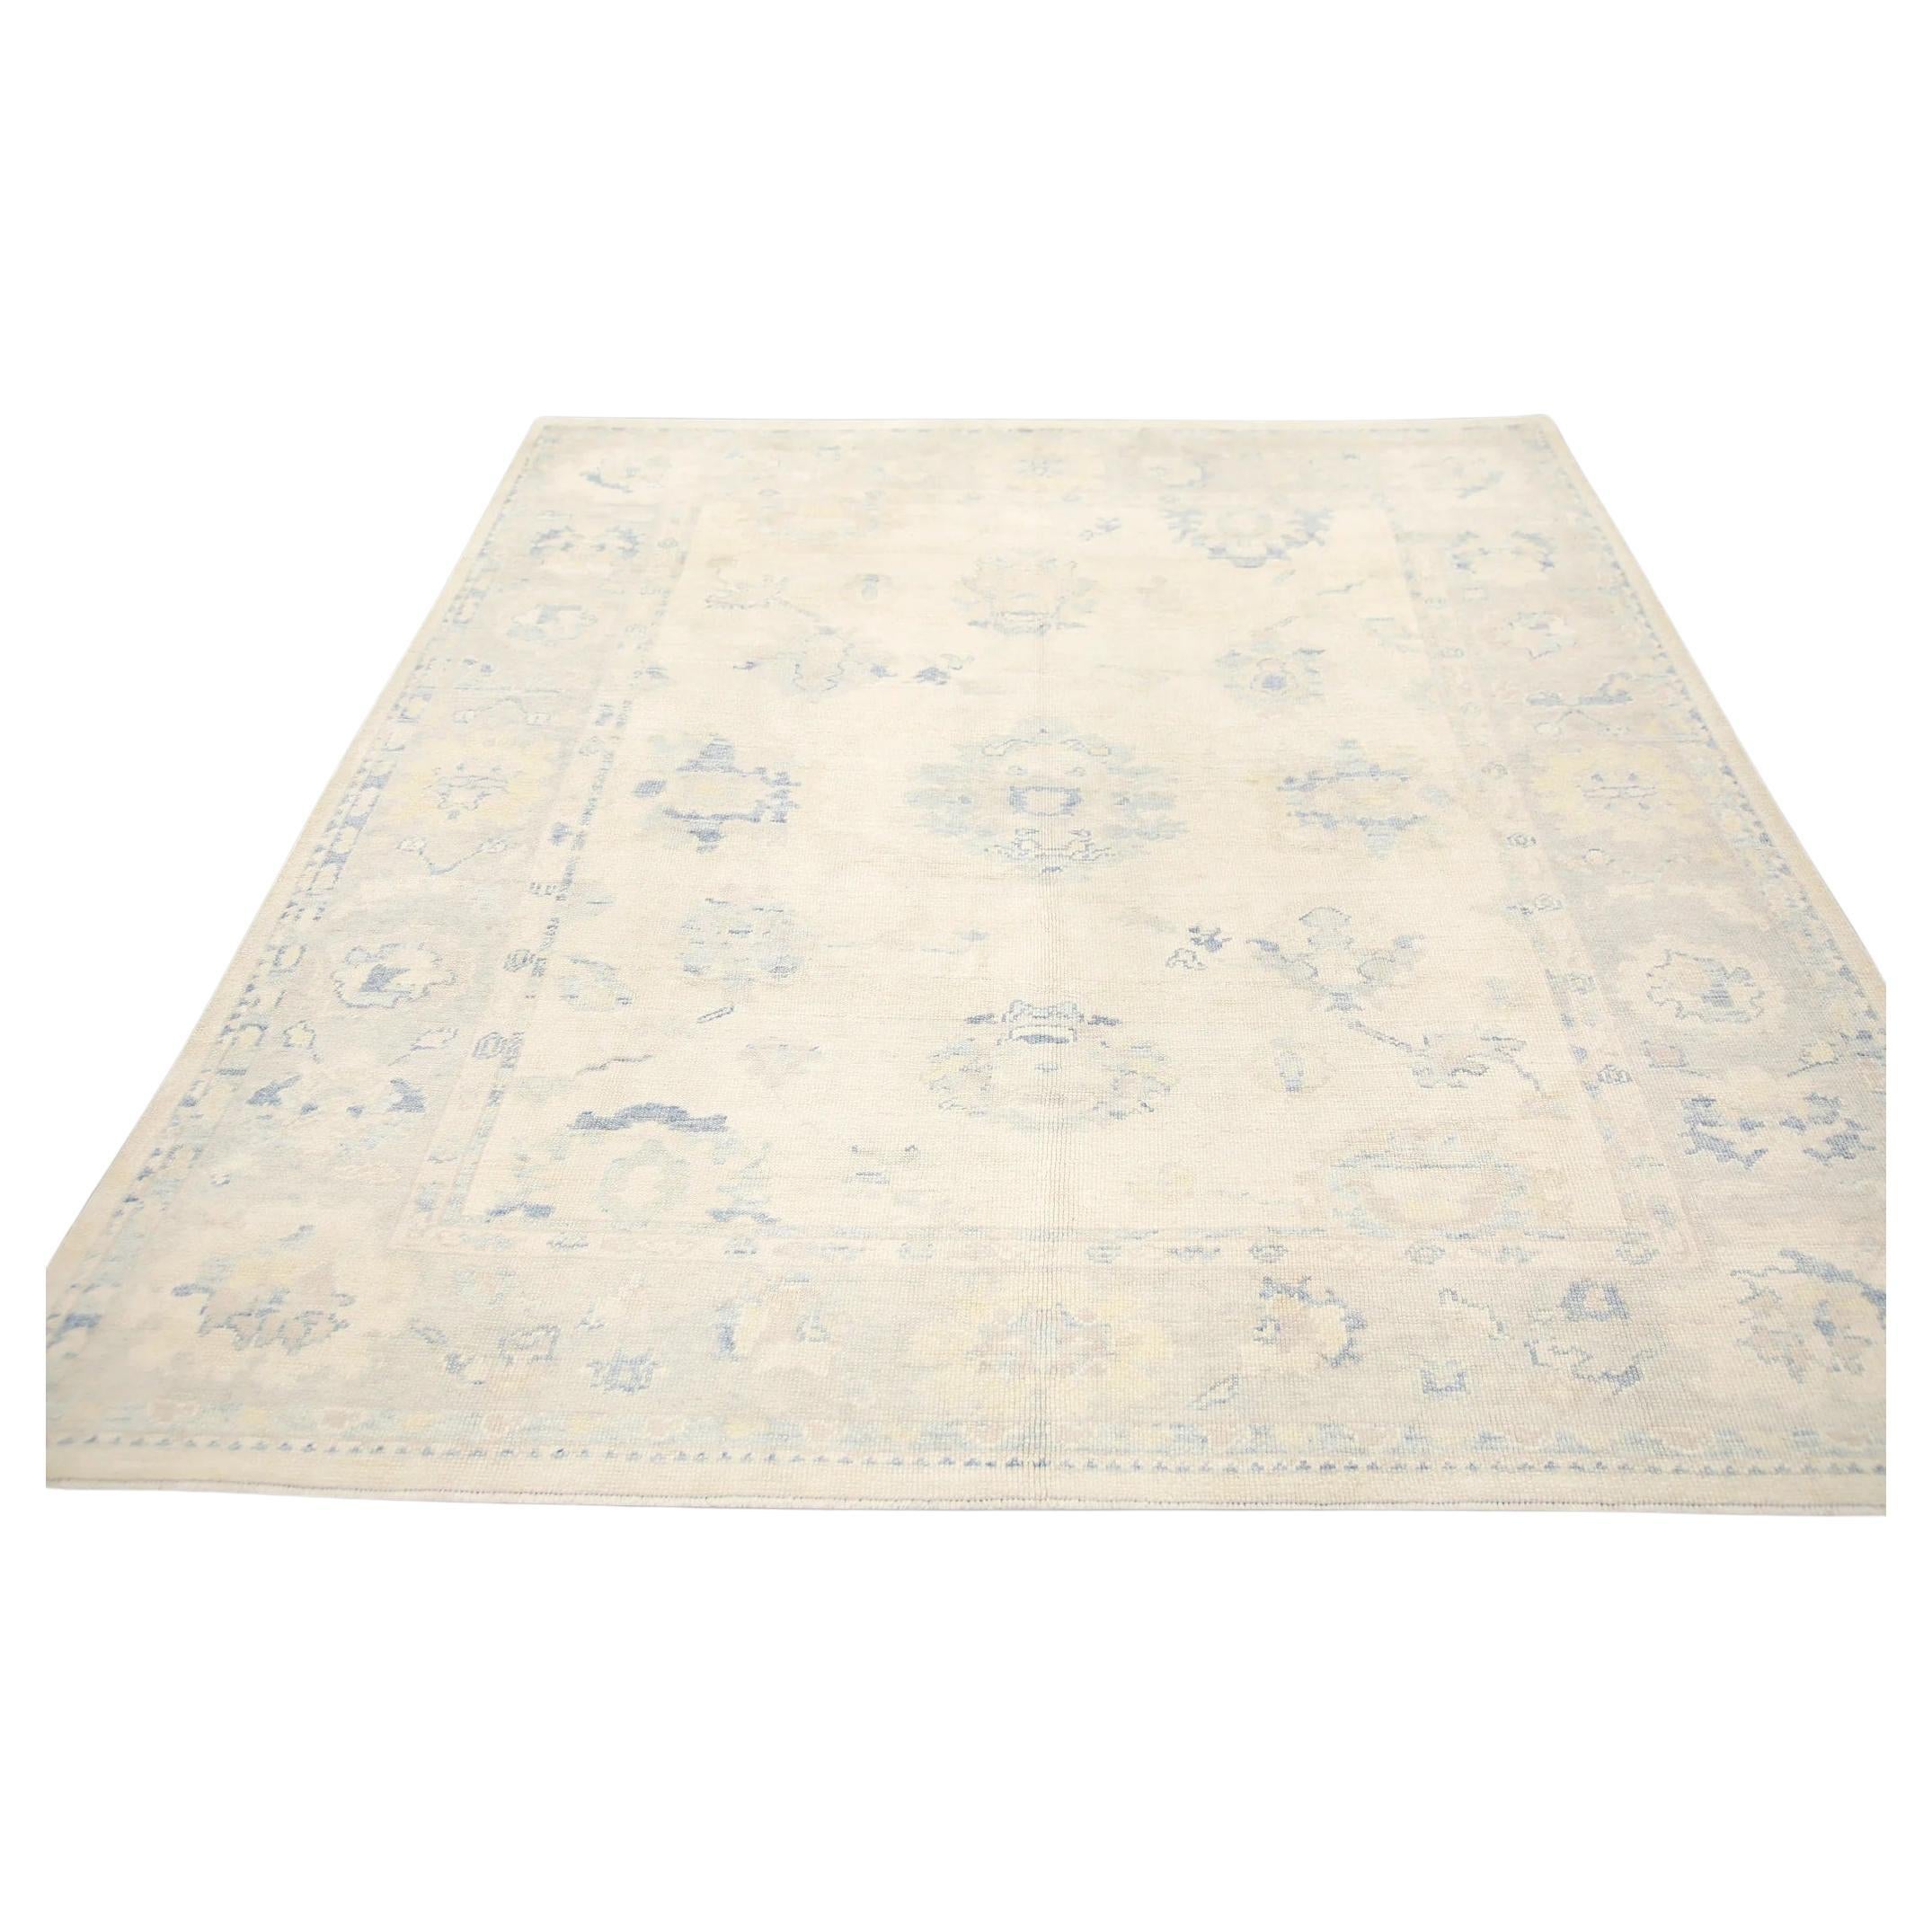 Cream Handwoven Wool Turkish Oushak Rug in Blue & Pink Floral Design 8' x 9'8" For Sale